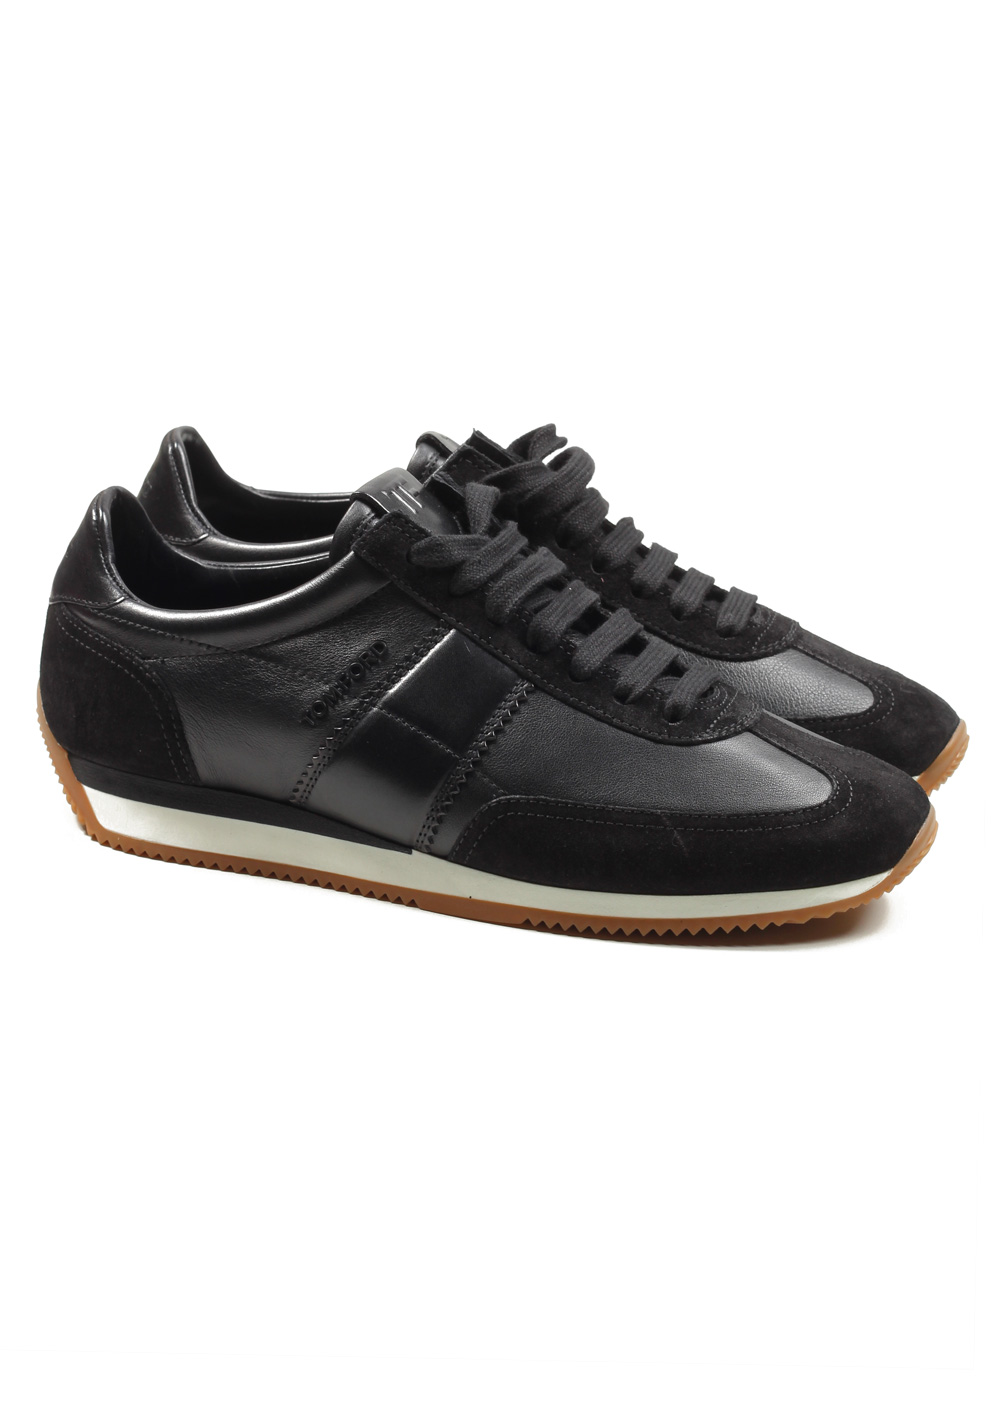 TOM FORD Orford Colorblock Suede Black Trainer Sneaker Shoes Size 8.5 UK / 9.5 U.S. | Costume Limité